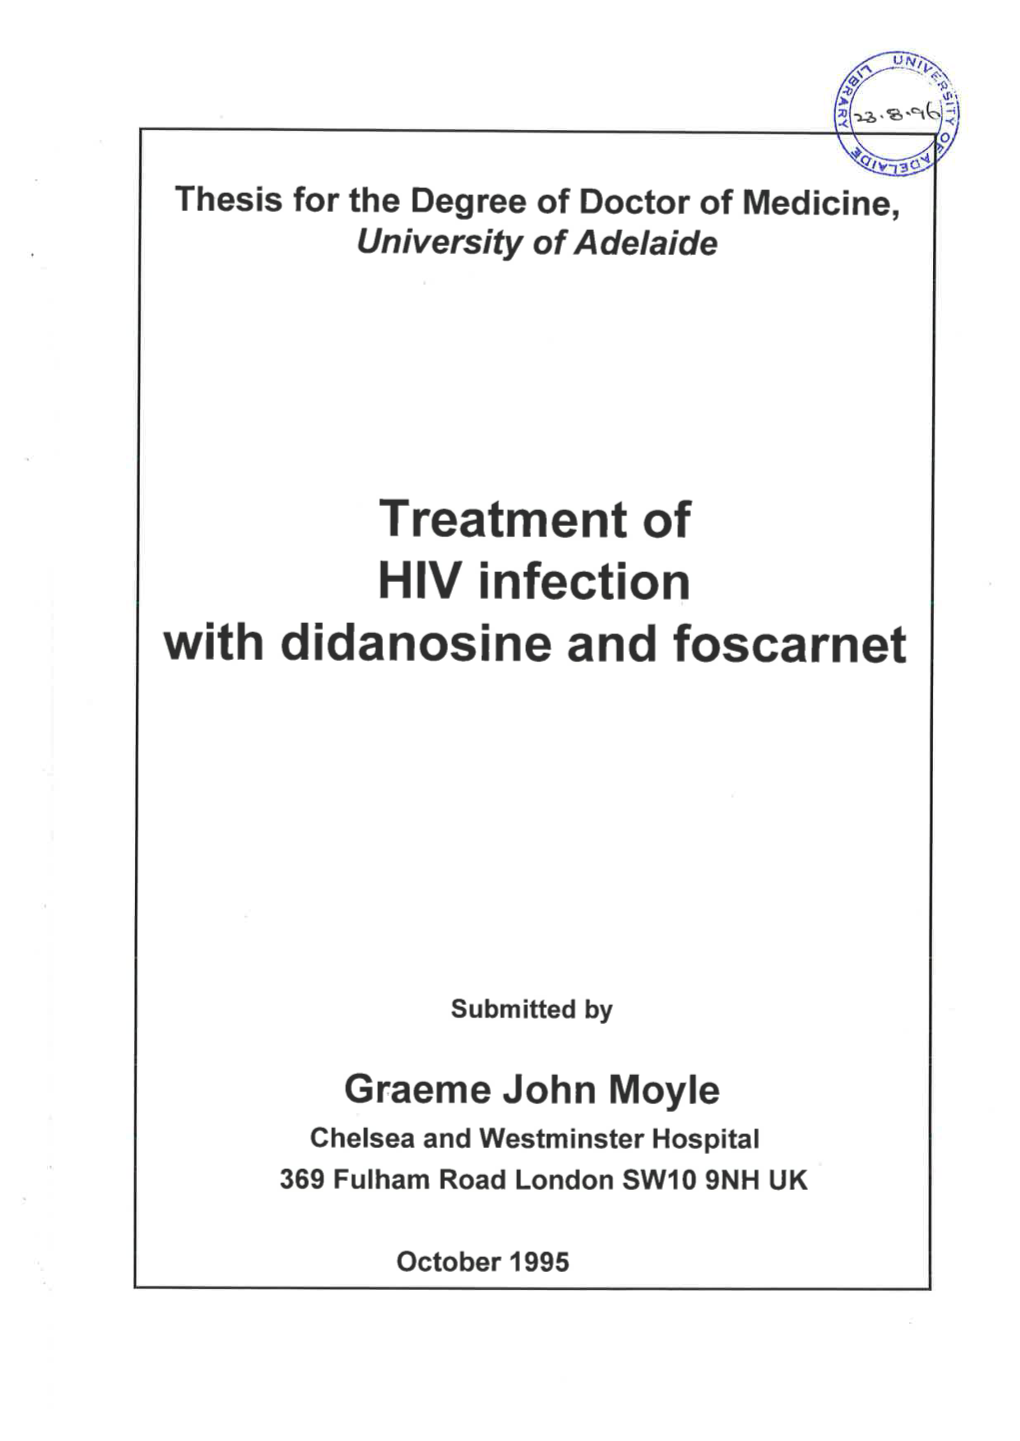 Treatment of HIV Infection with Didanosine and Foscarnet